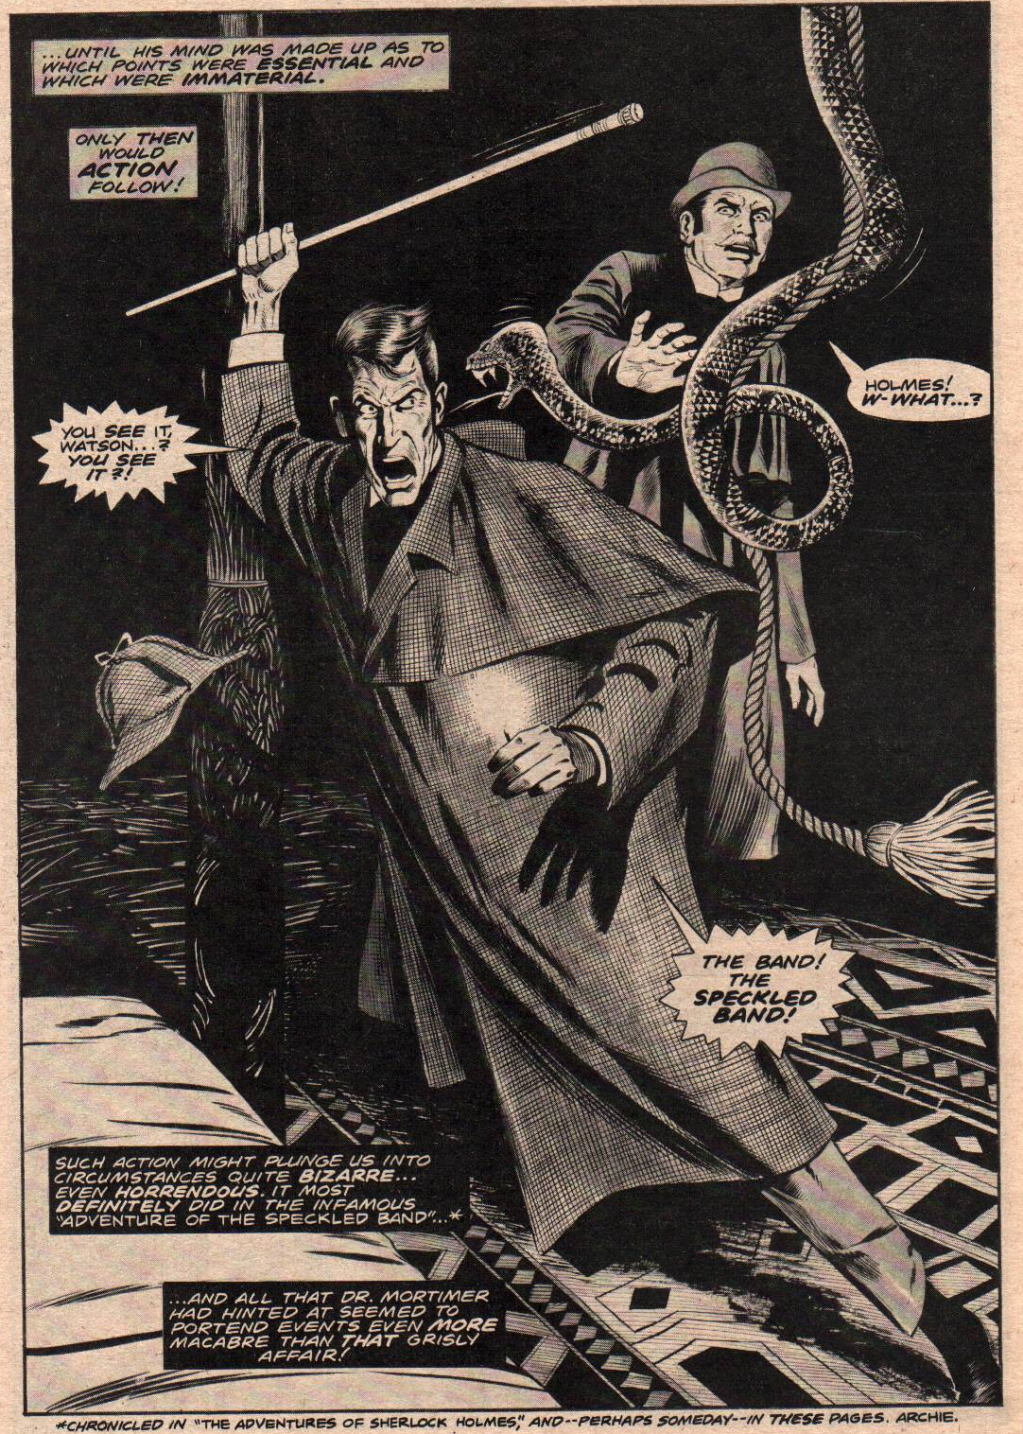 Sherlock Holmes warns Doctor Watson of an impending danger in Marvel Preview Vol. 1 #5 "Part One: The Hound of Baskervilles - The Problem" (1976), Marvel Comics. Words by Arthur Conan Doyle and Doug Moench, art by Val Mayerik, Dan Adkins, and Joe Rosen.